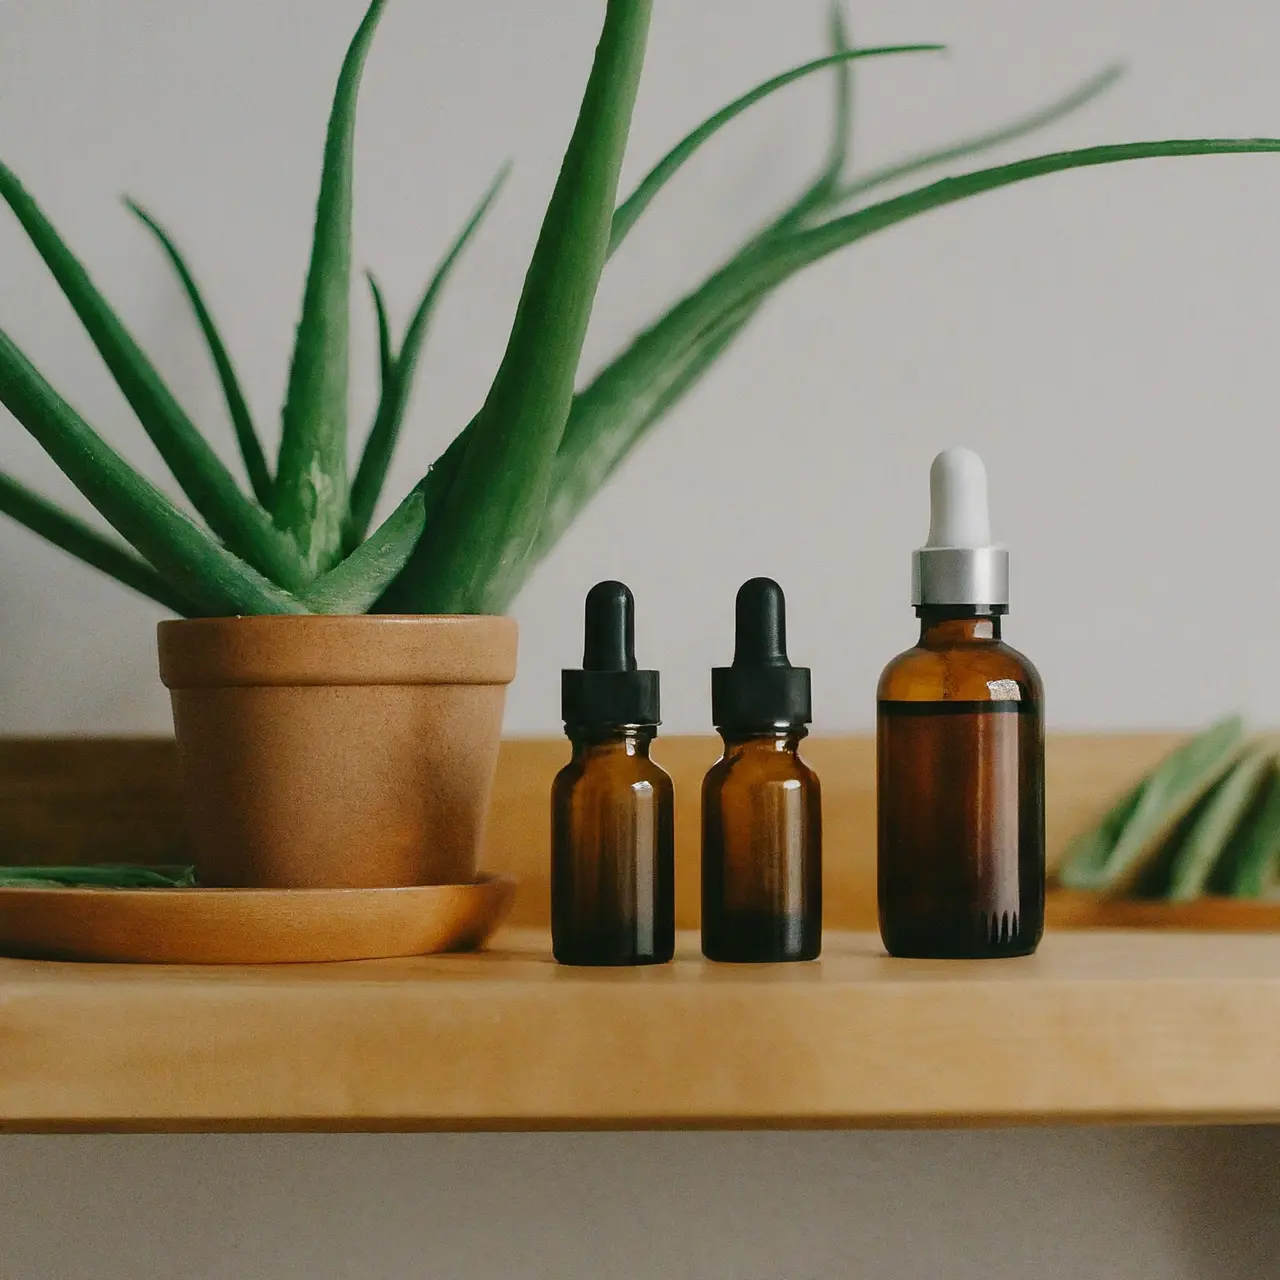 Aloe Vera plants and essential oils on a wooden shelf. 35mm stock photo